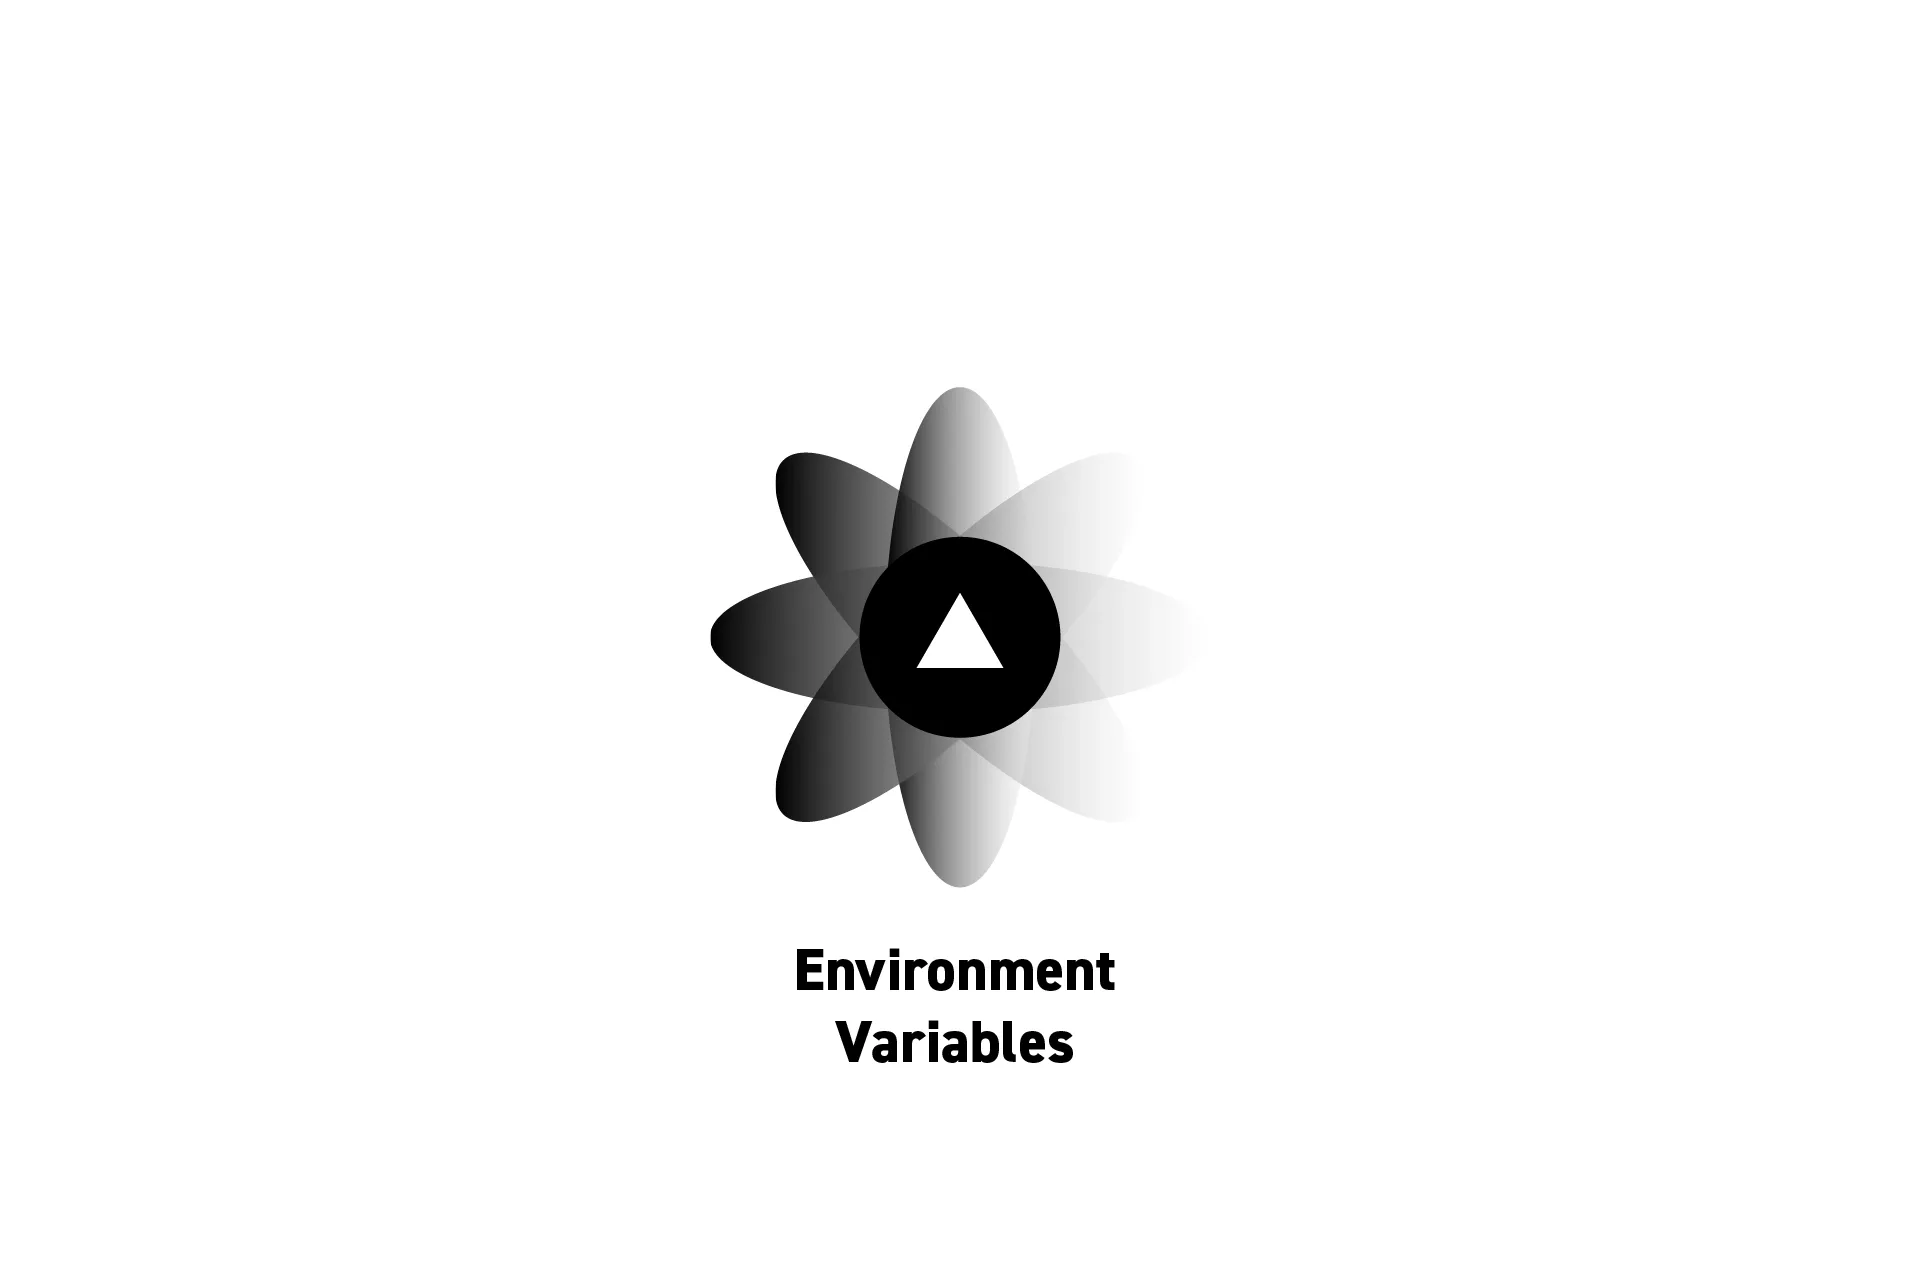 A flower that represents Vercel with the text "Environment Variables” beneath it.